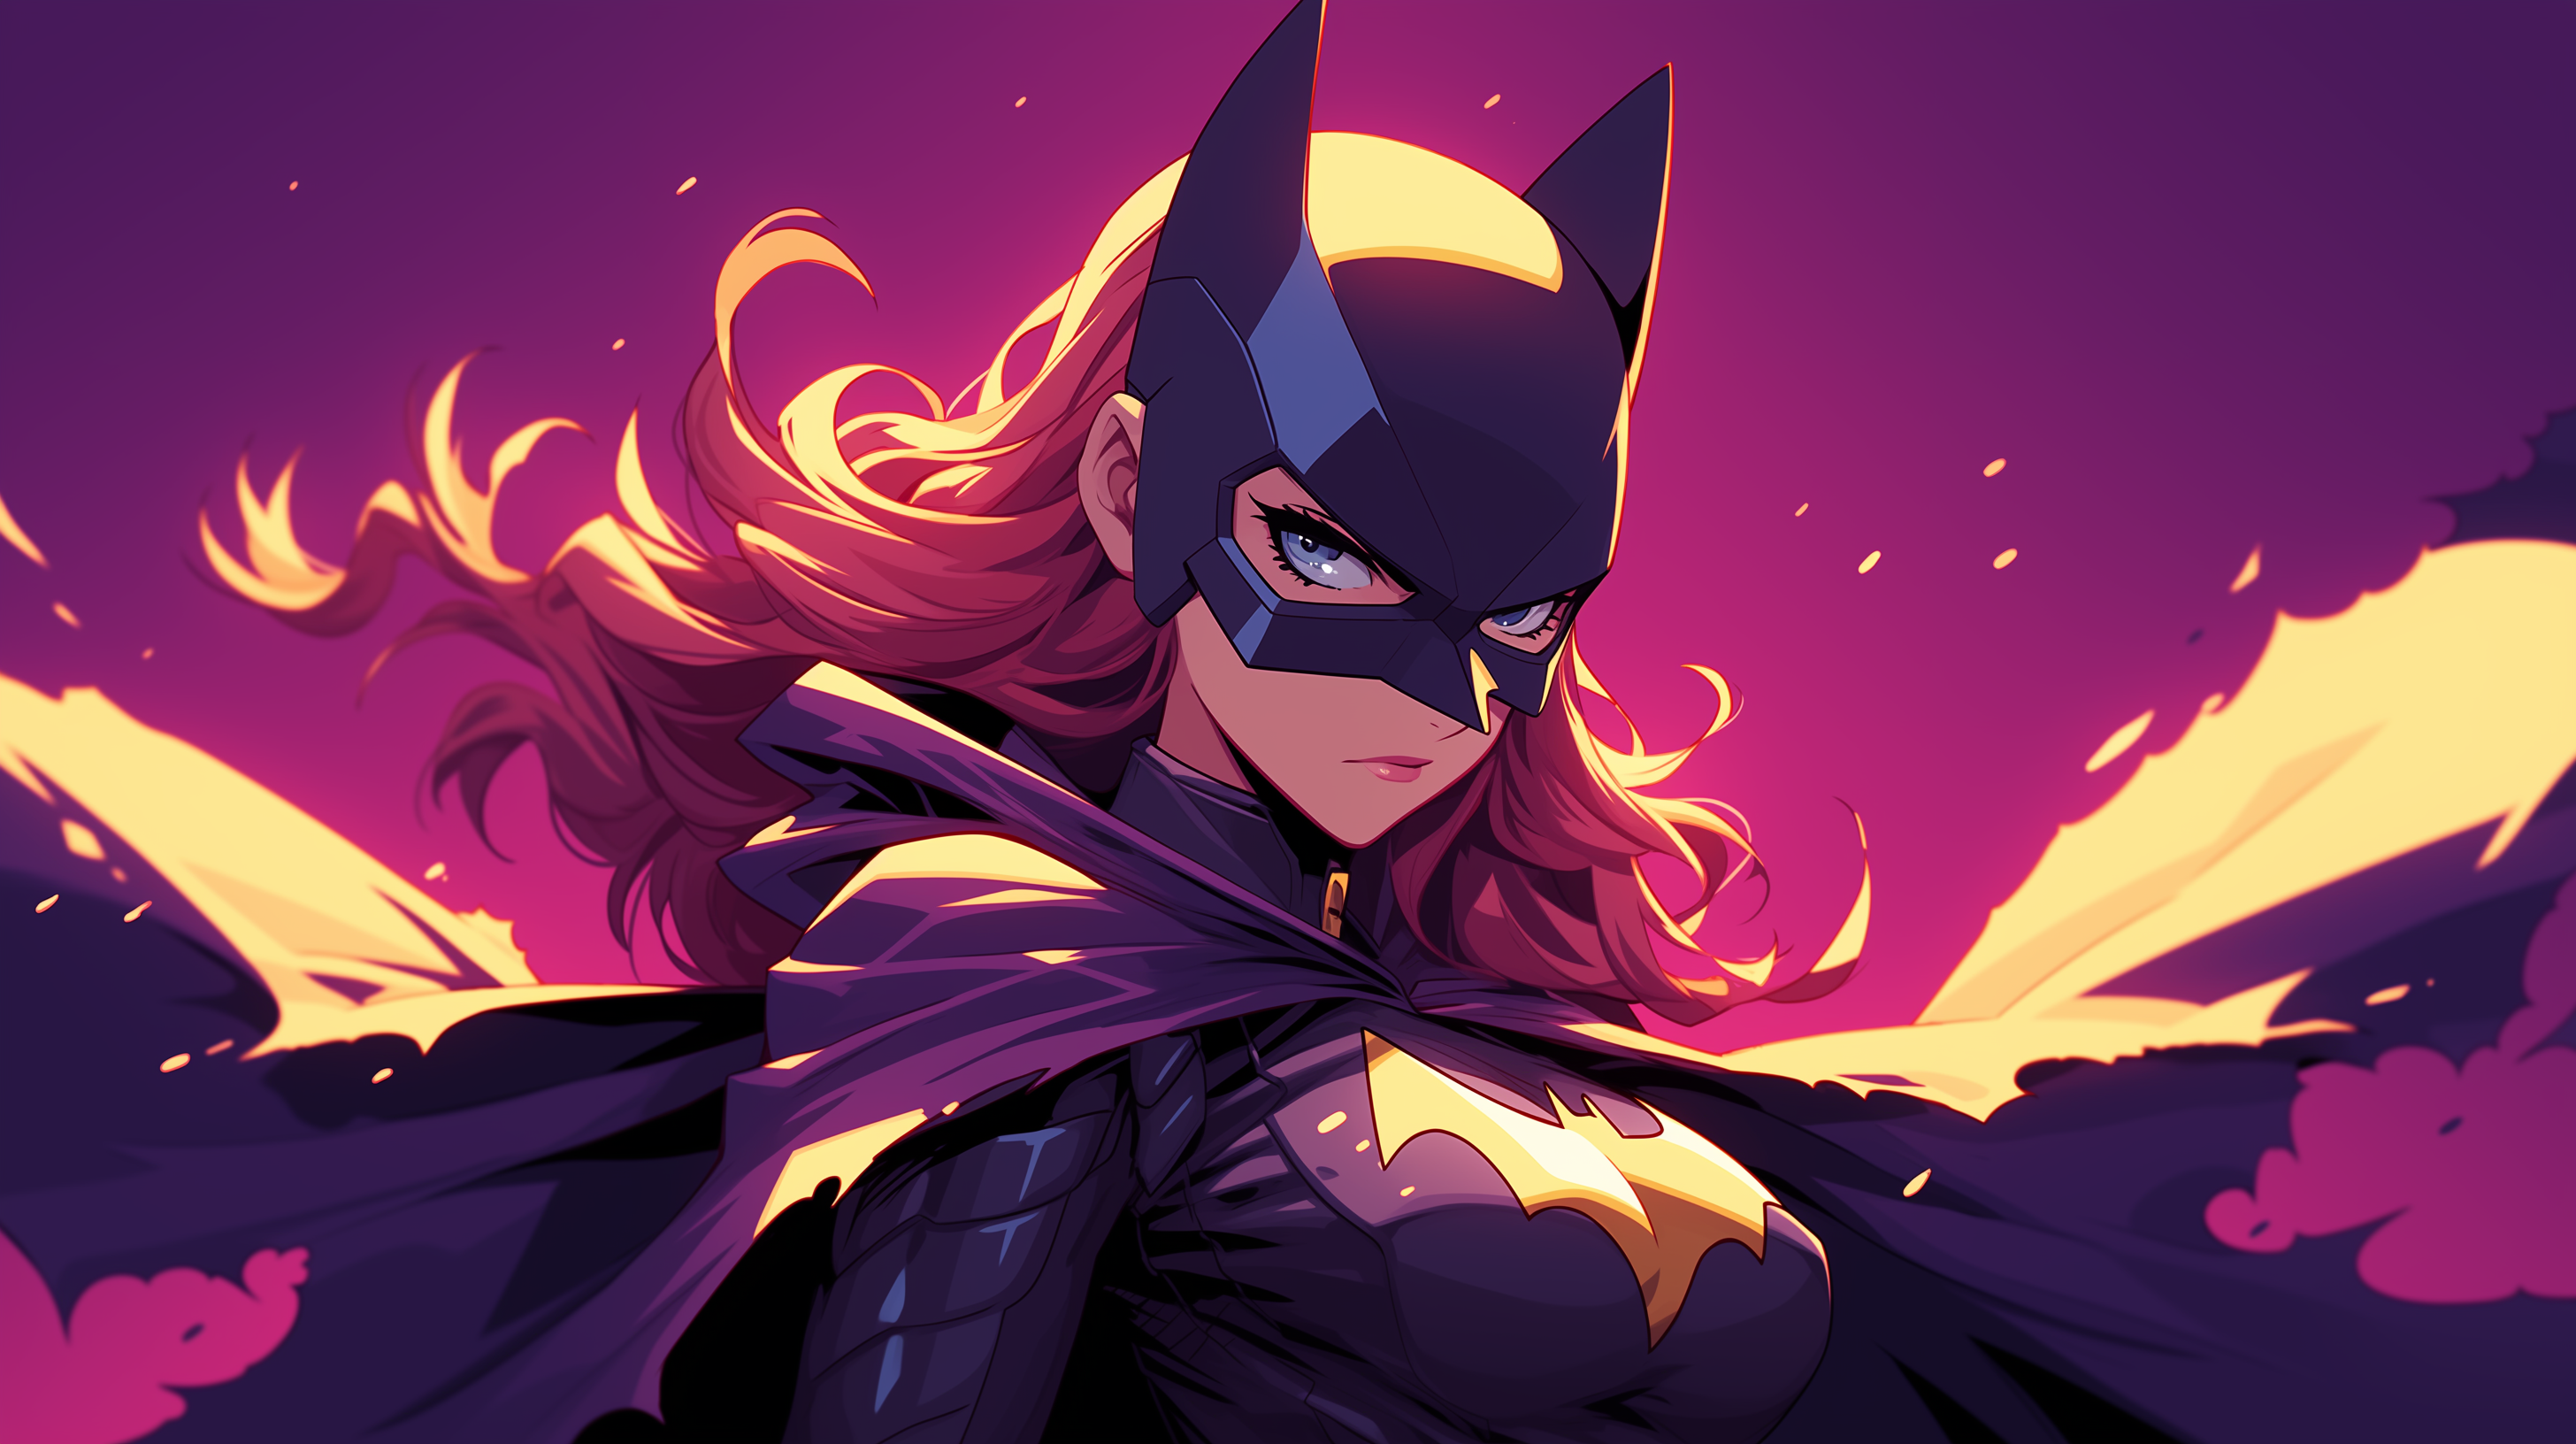 HD desktop wallpaper of Batgirl in dynamic pose with a vibrant purple and orange sunset background, perfect for superhero enthusiasts.